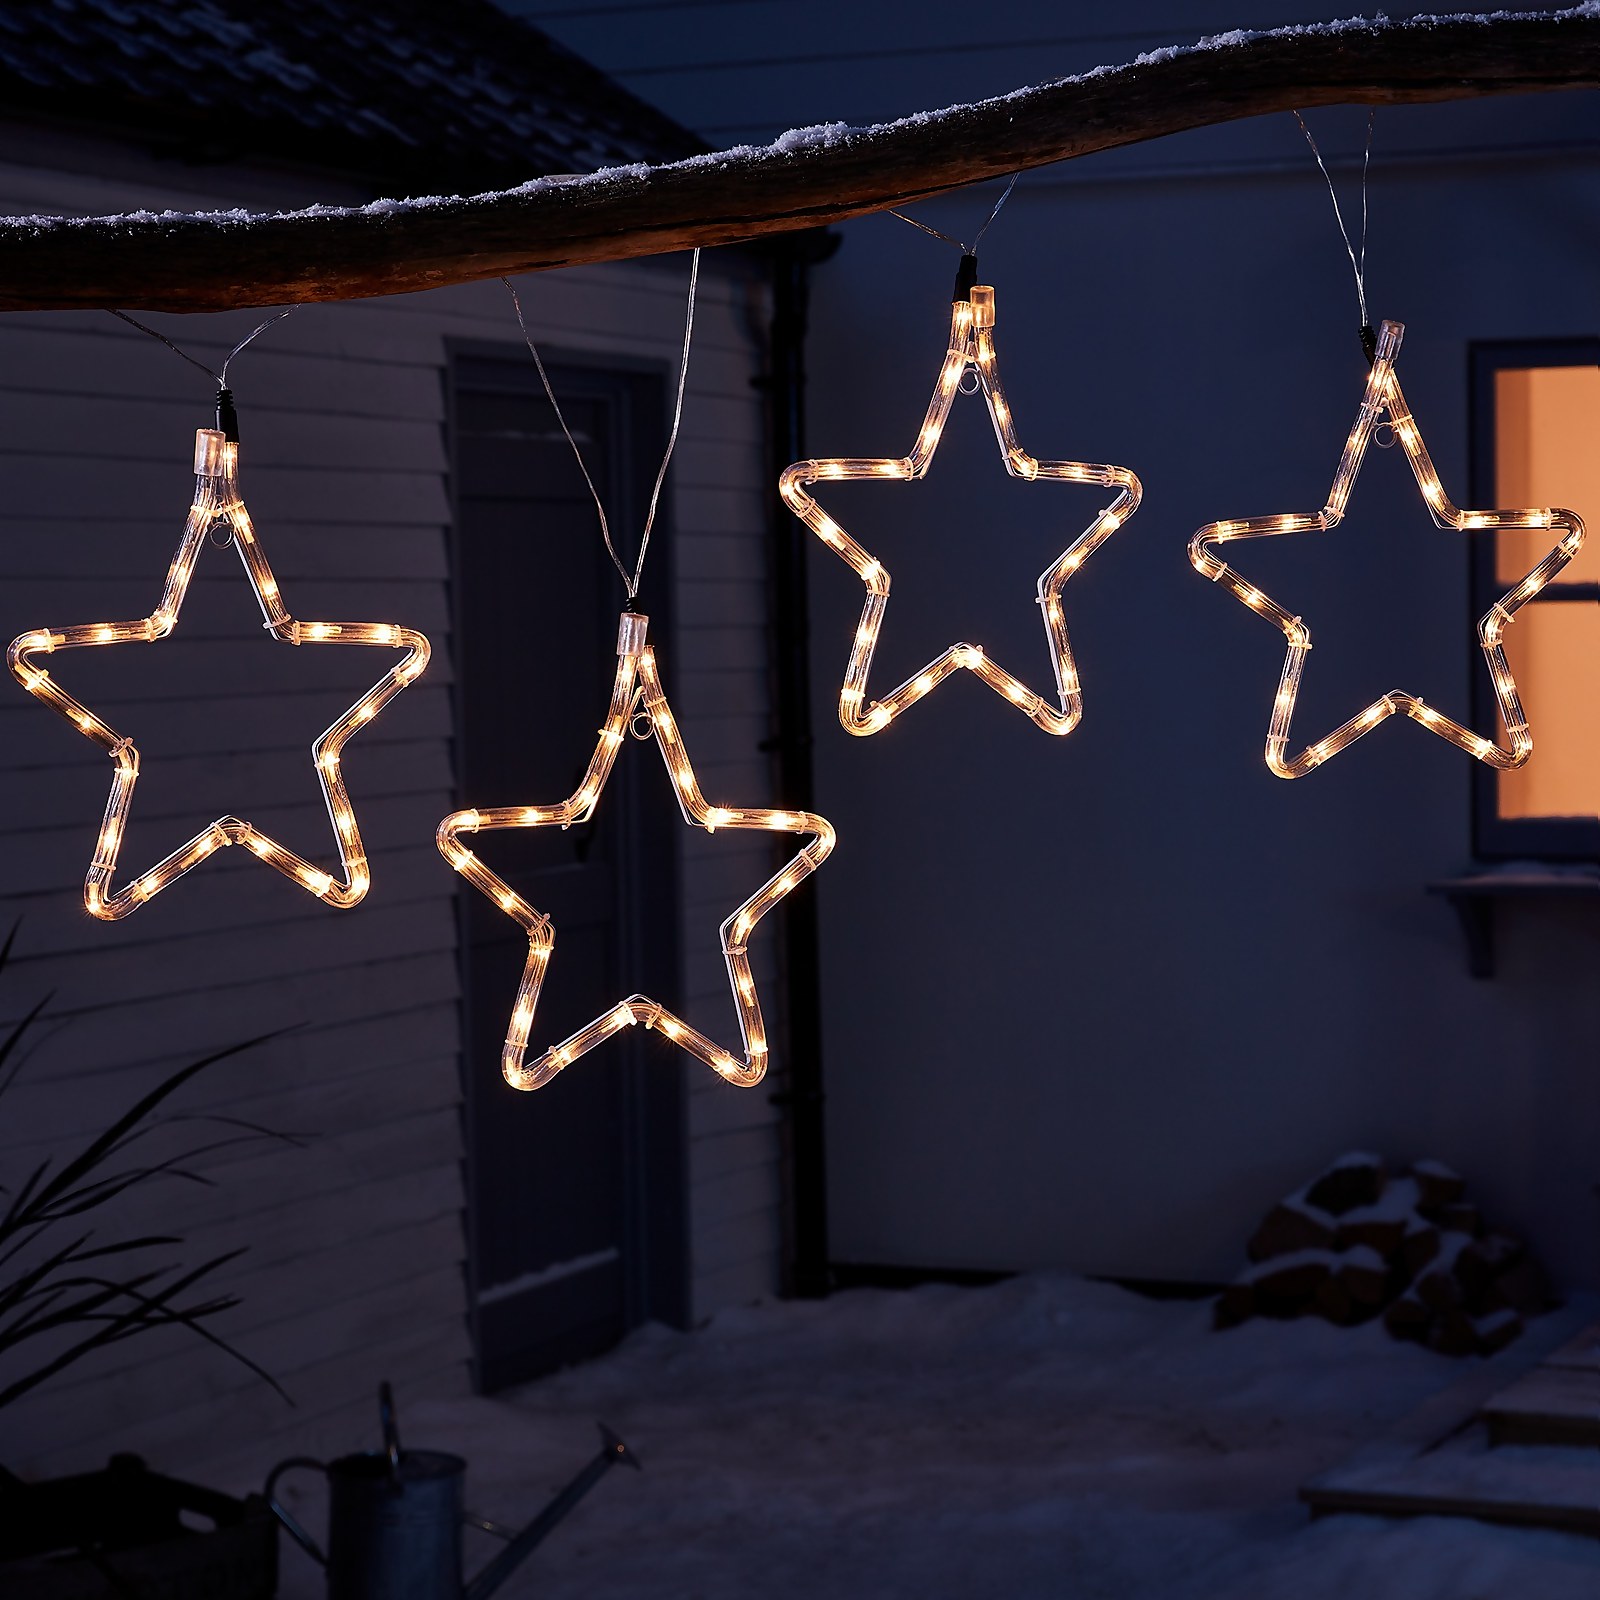 Photo of 4 Star Led Decorative Outdoor Christmas String Light- Warm White